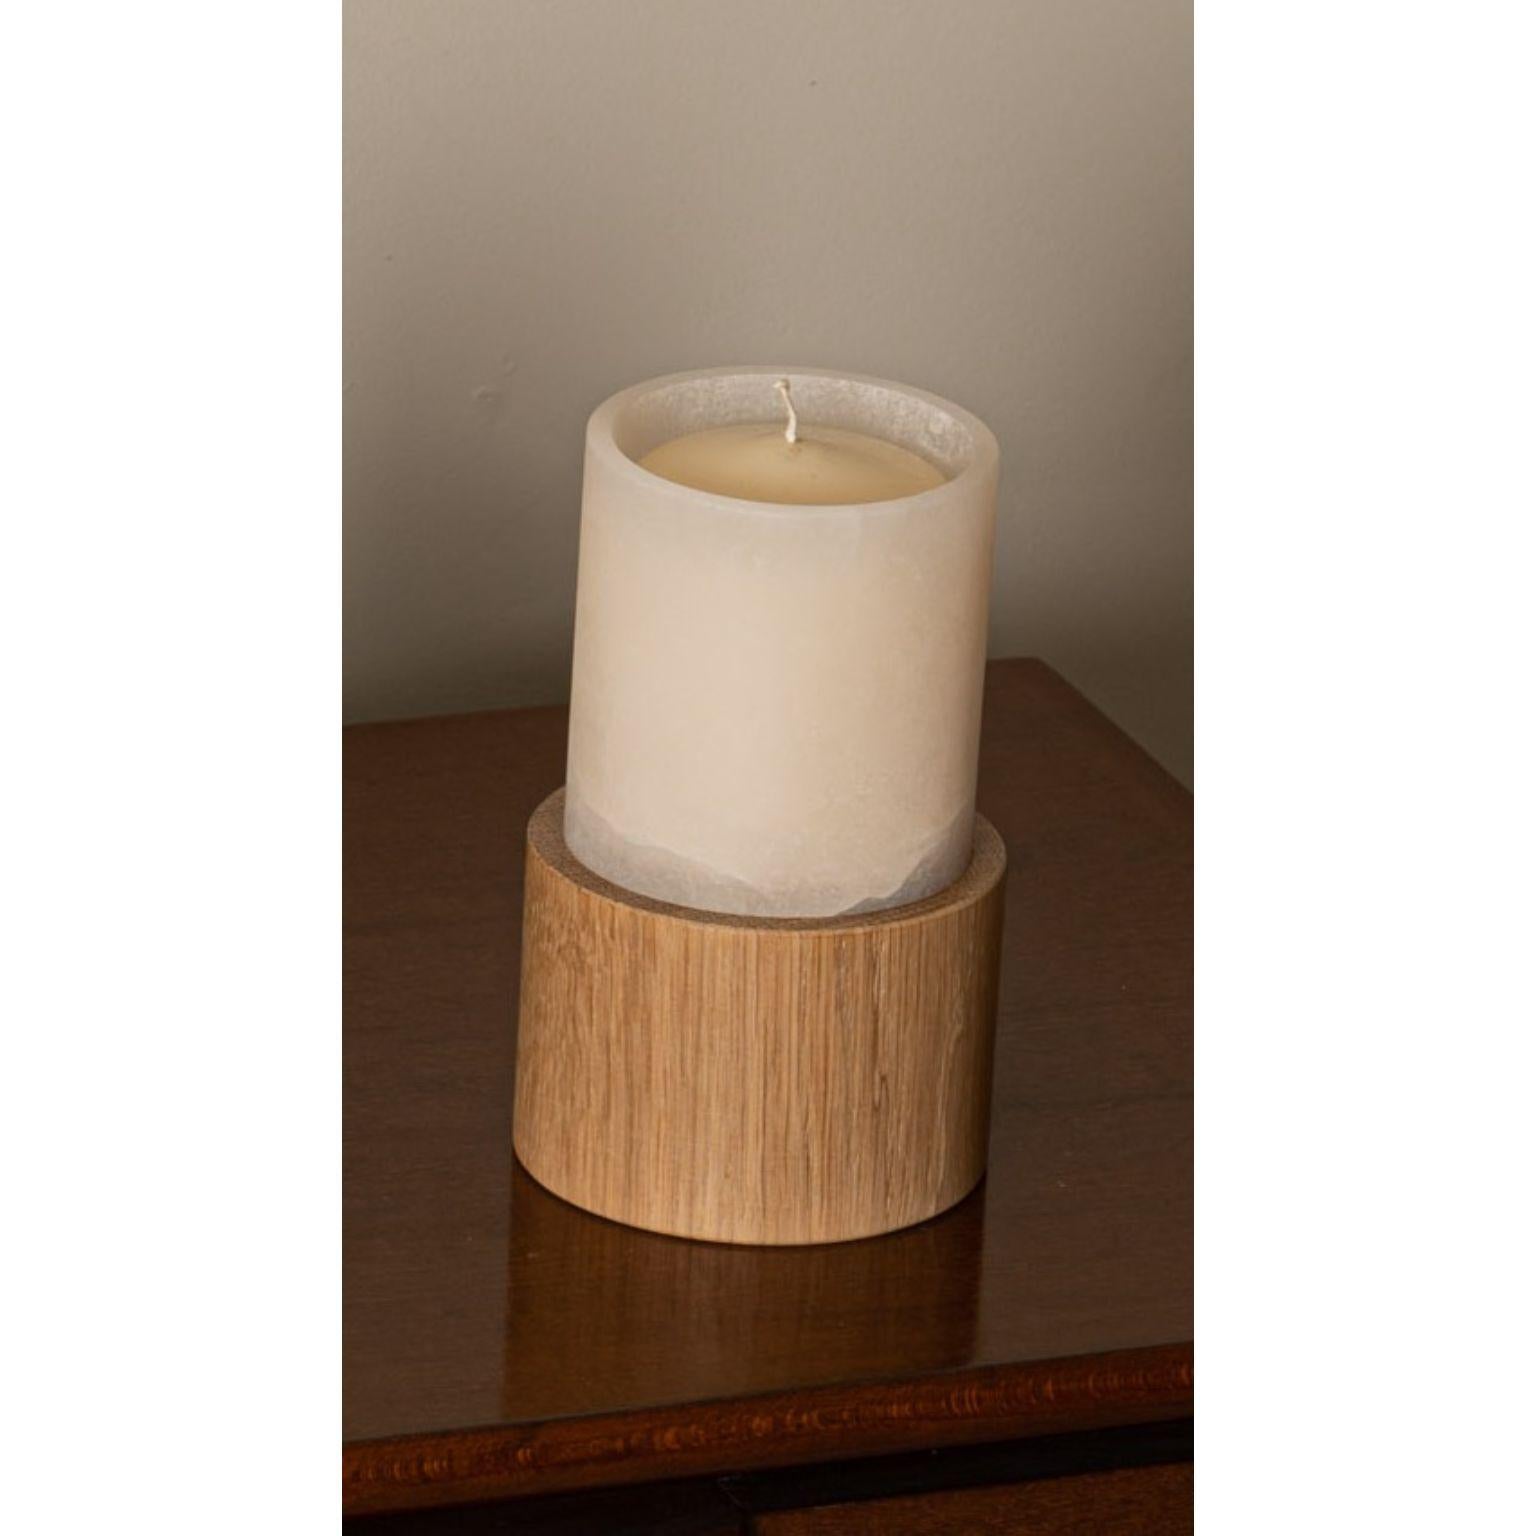 Kelo Oak Candle by Simone & Marcel
Dimensions: D 11 x W 11 x H 31.5 cm.
Materials: Oak and white alabaster.

Custom options available on request. Please contact us. 

A bold, elevated and minimalism design. The Kelo Candle balances white alabaster